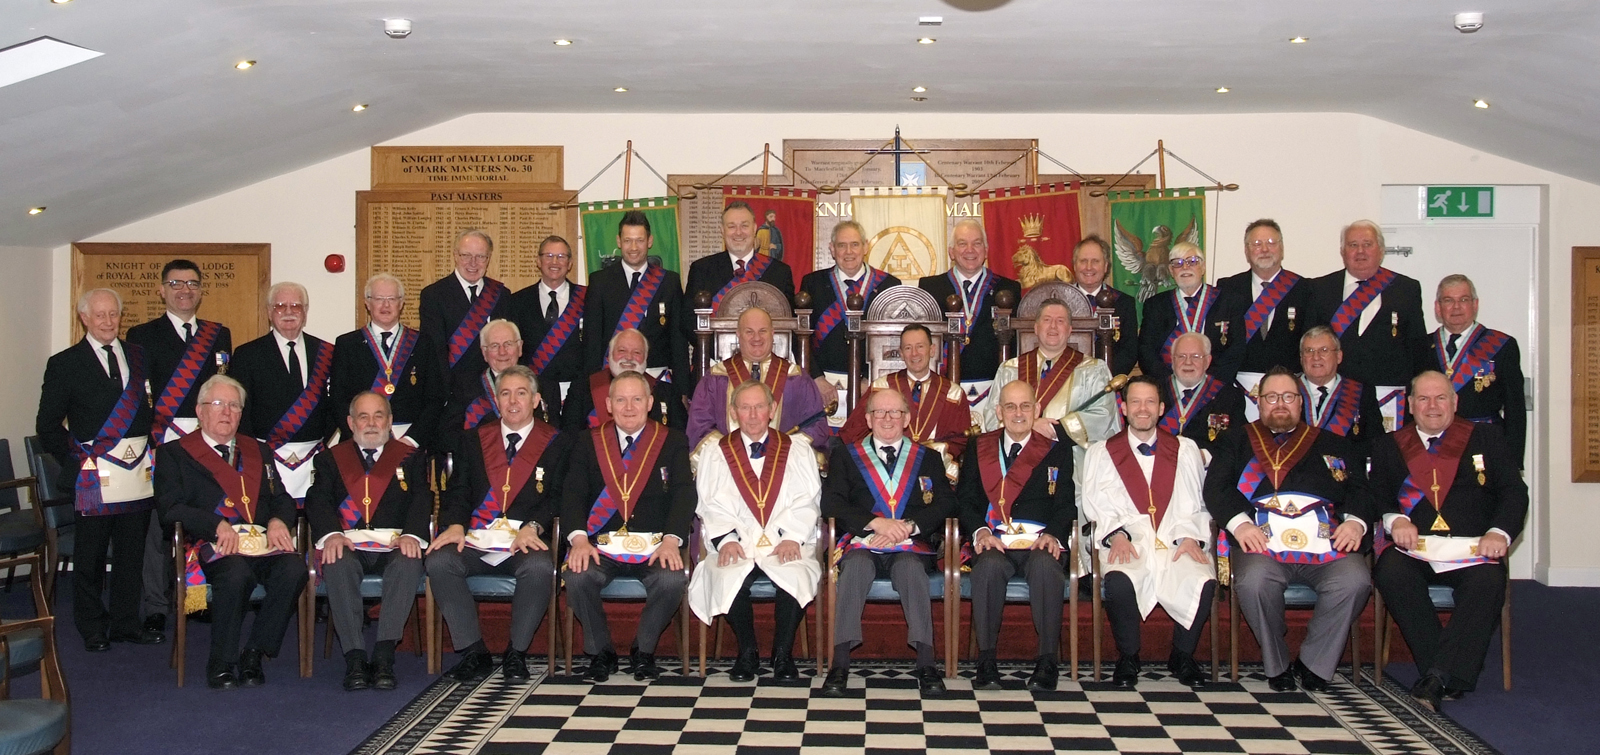 50th Anniversary of the Knights of Malta Chapter No 50